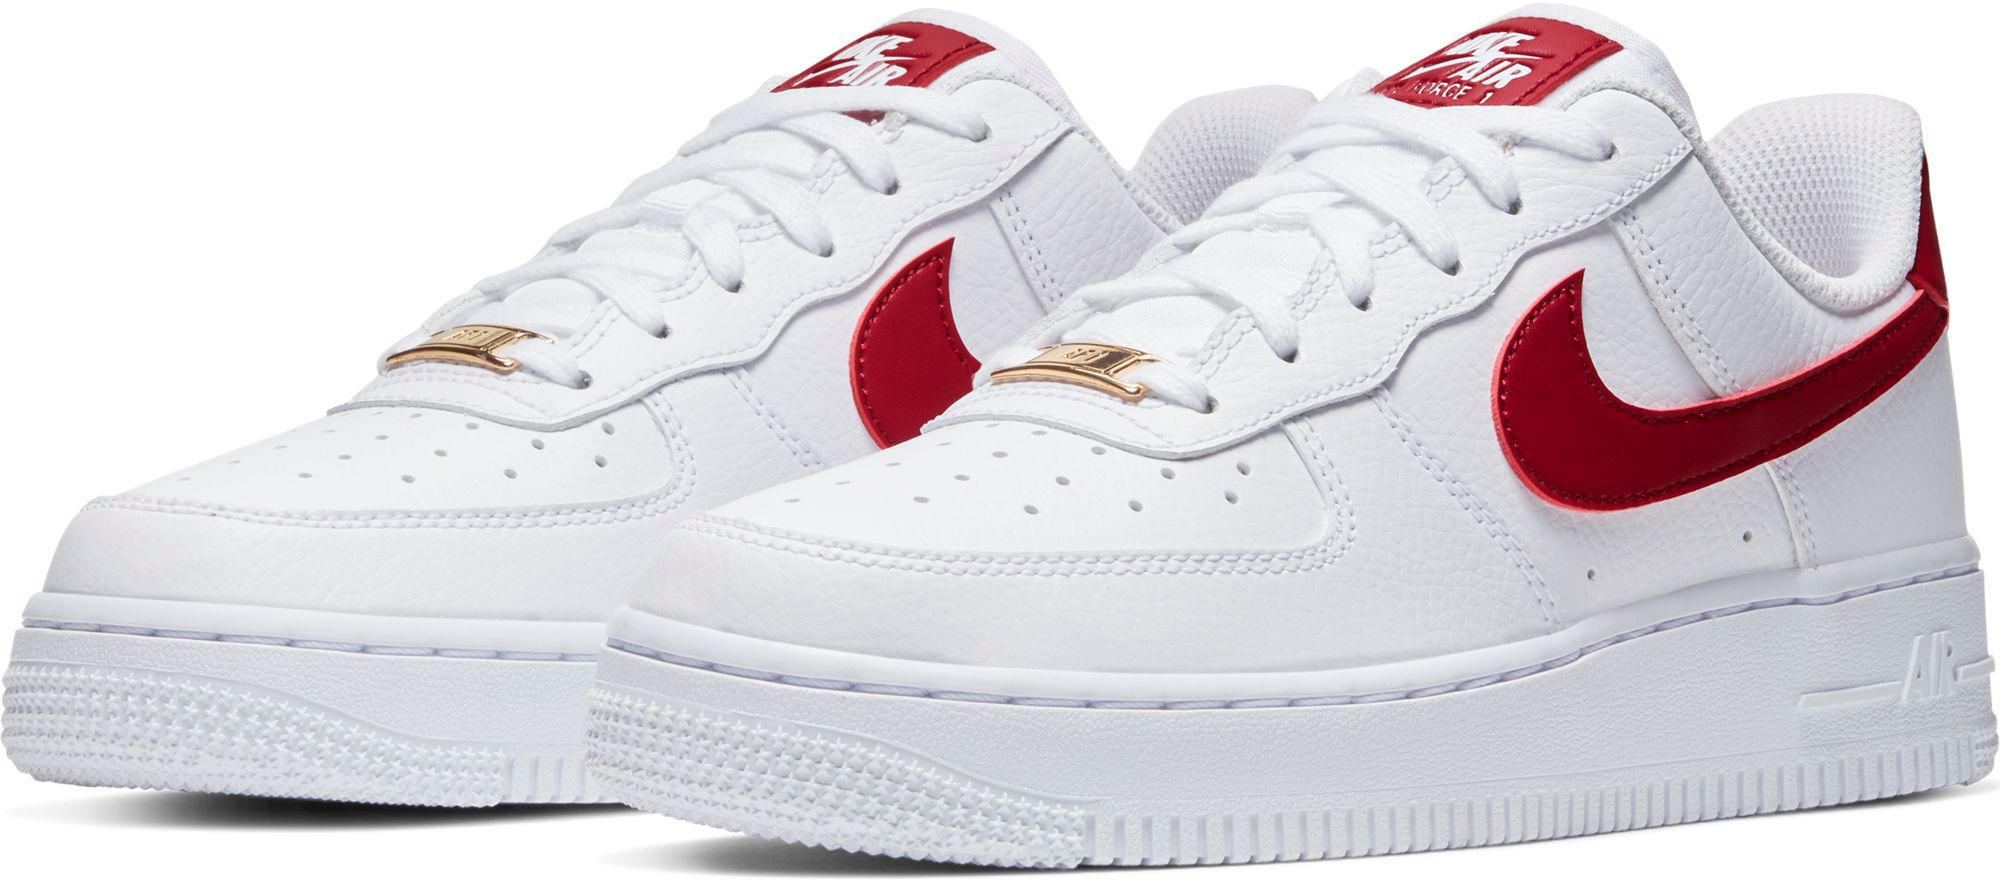 womens nike air force 1 red